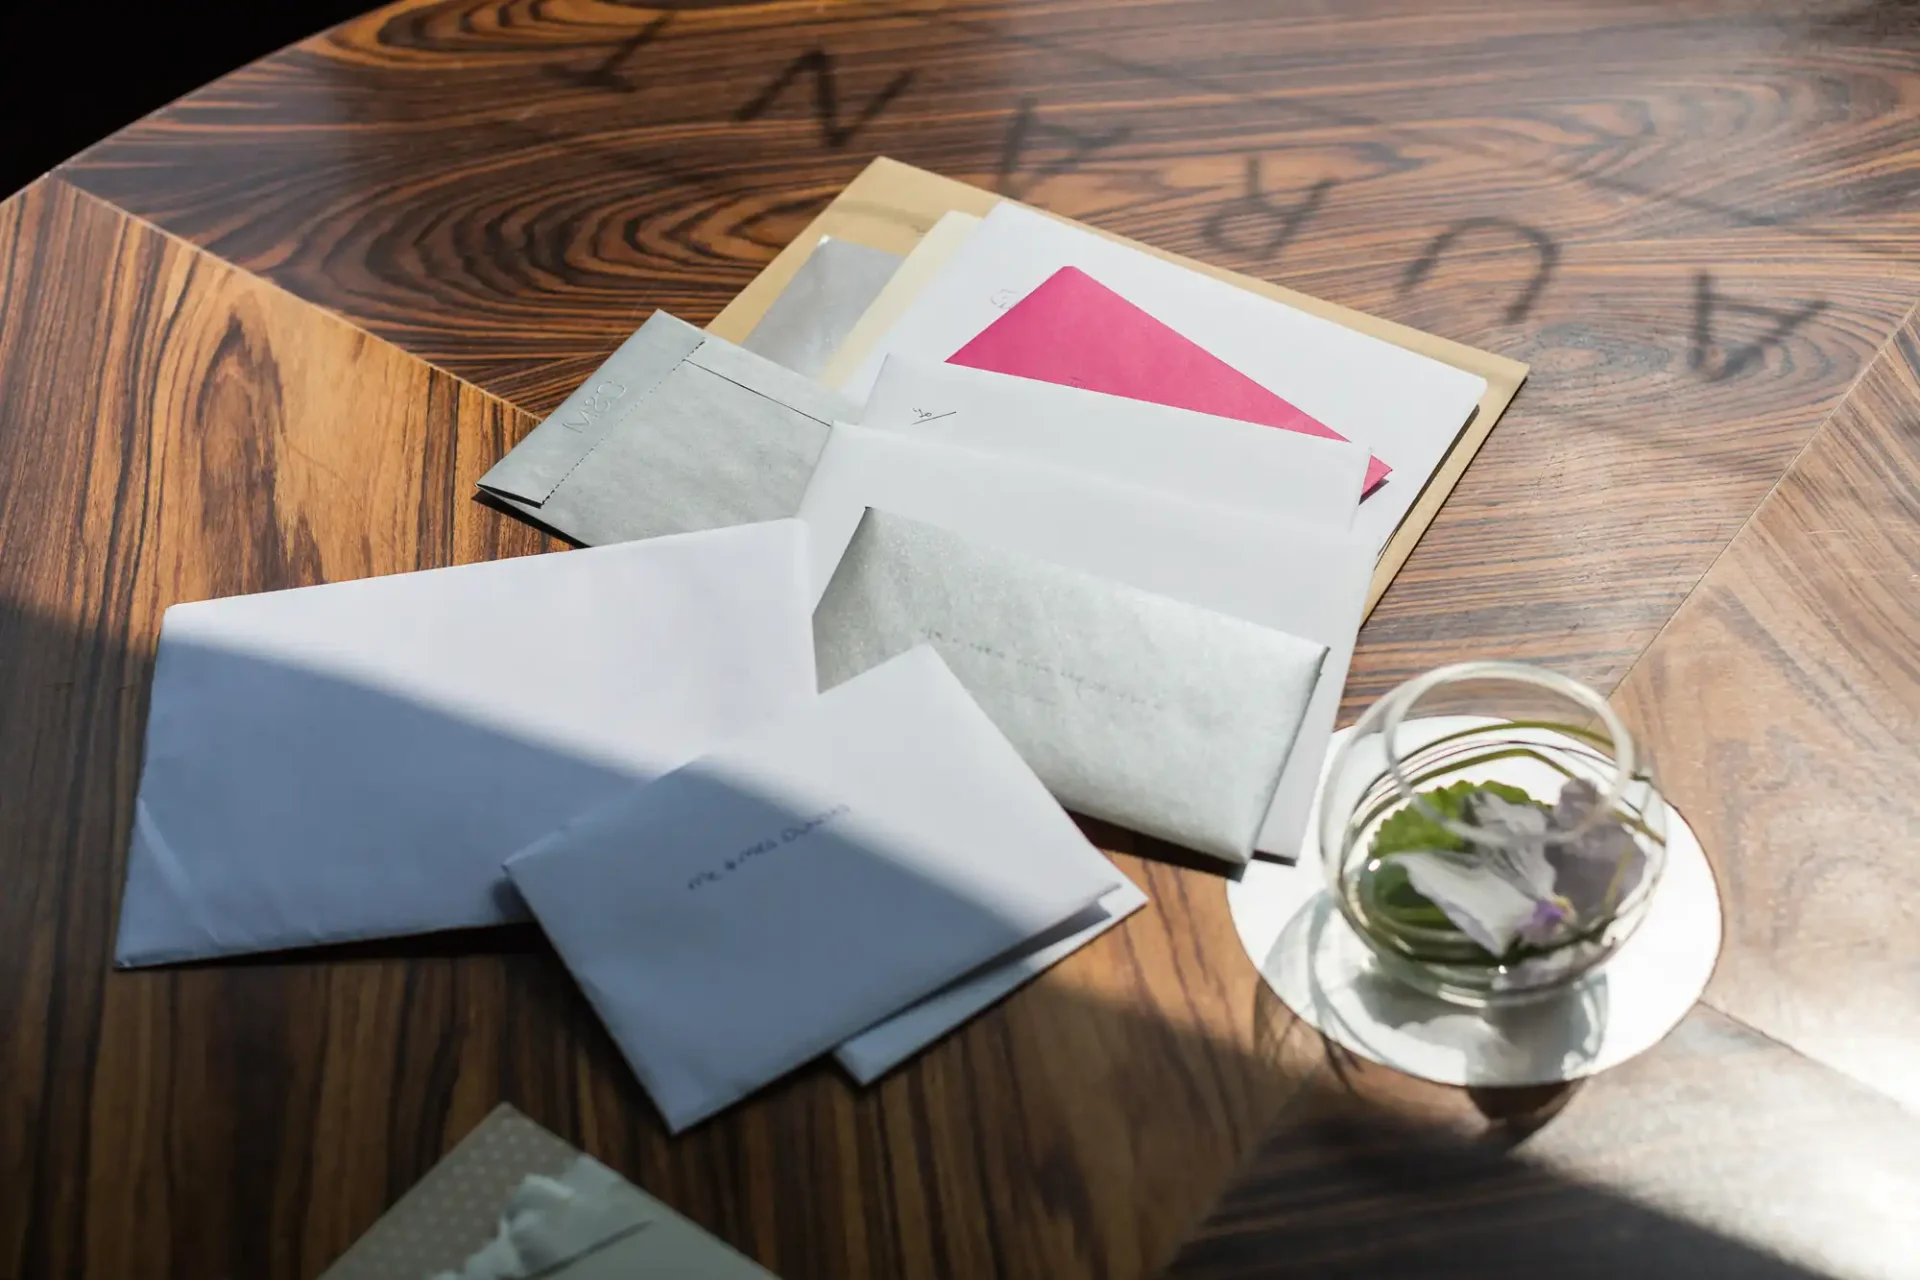 Sunlight shines on a wooden table holding several scattered envelopes and a glass vase with a white flower.